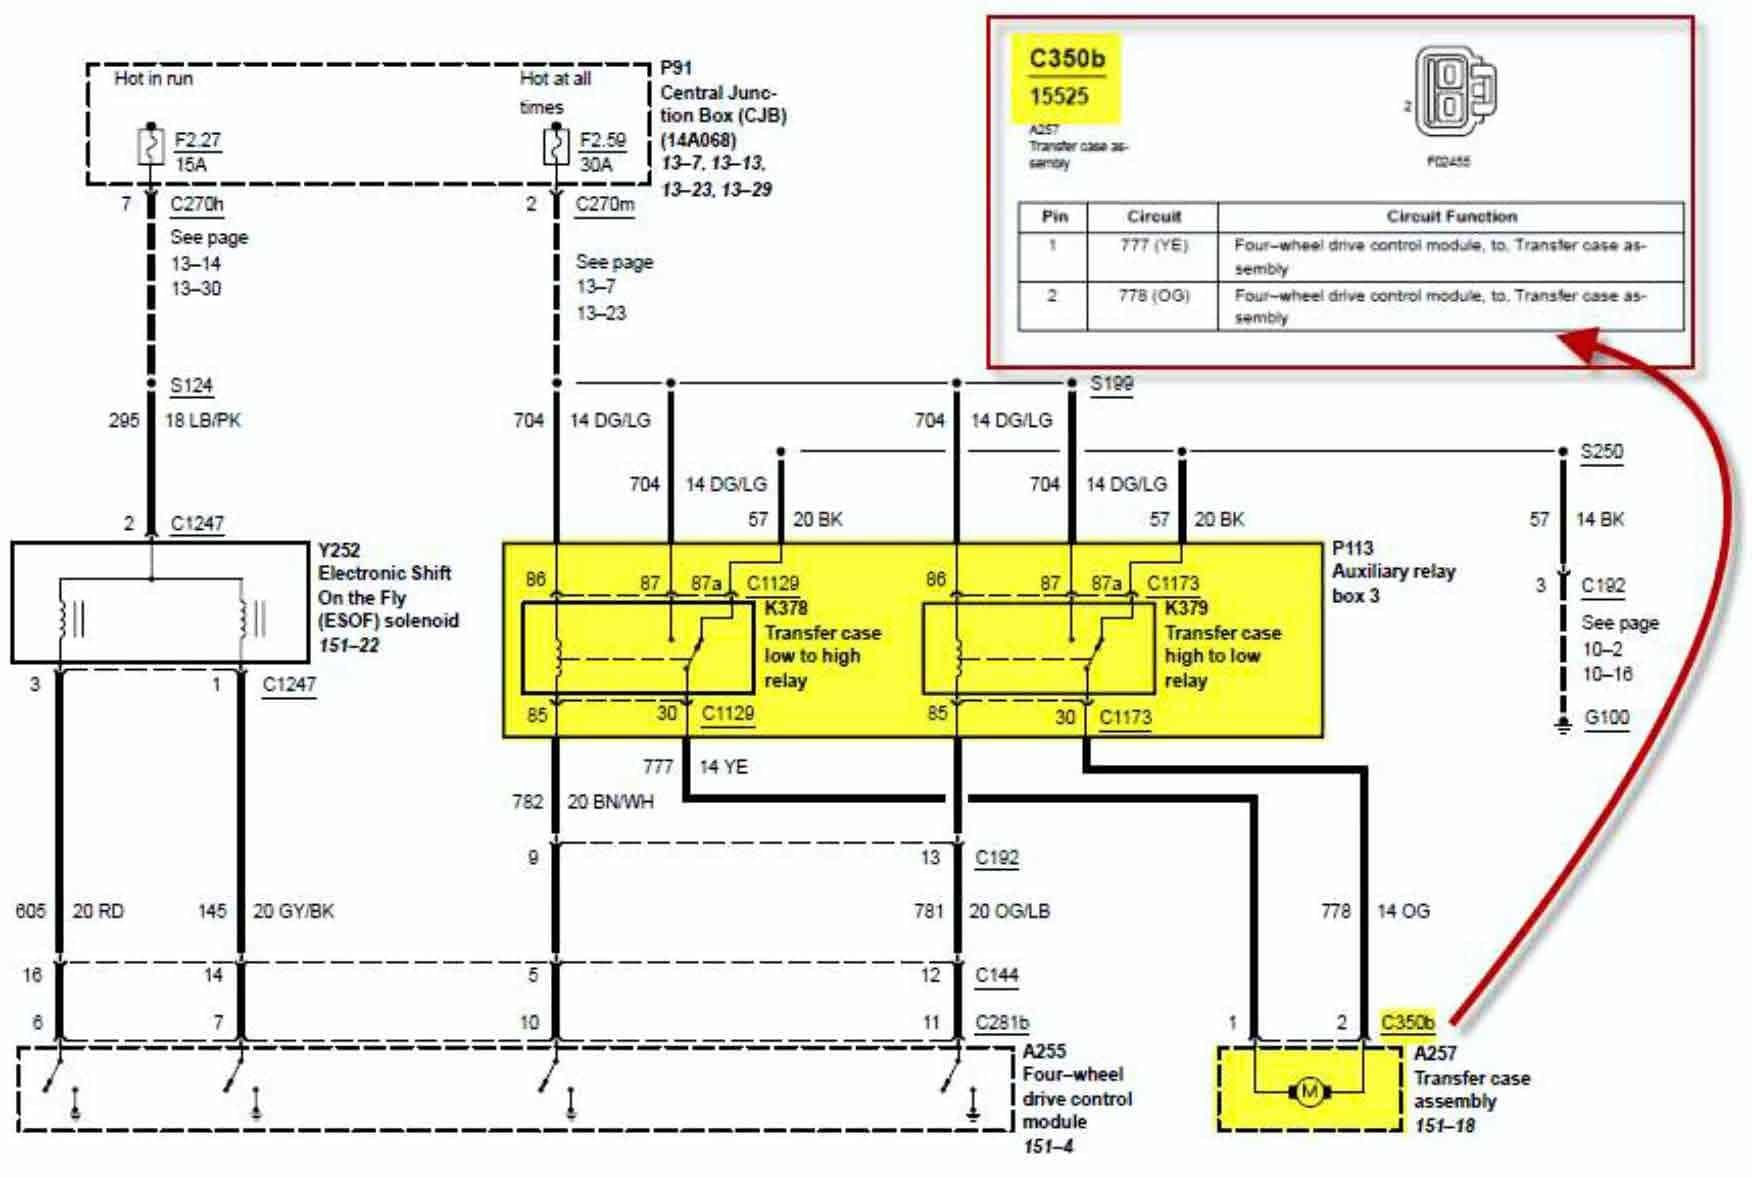 4x4 Wiring Diagram and Now Troubleshooting Complete ESOF 4x4 Failure - Ford  Truck Enthusiasts Forums  2003 Ford F350 Diesel Wiring Diagram    Ford Truck Enthusiasts